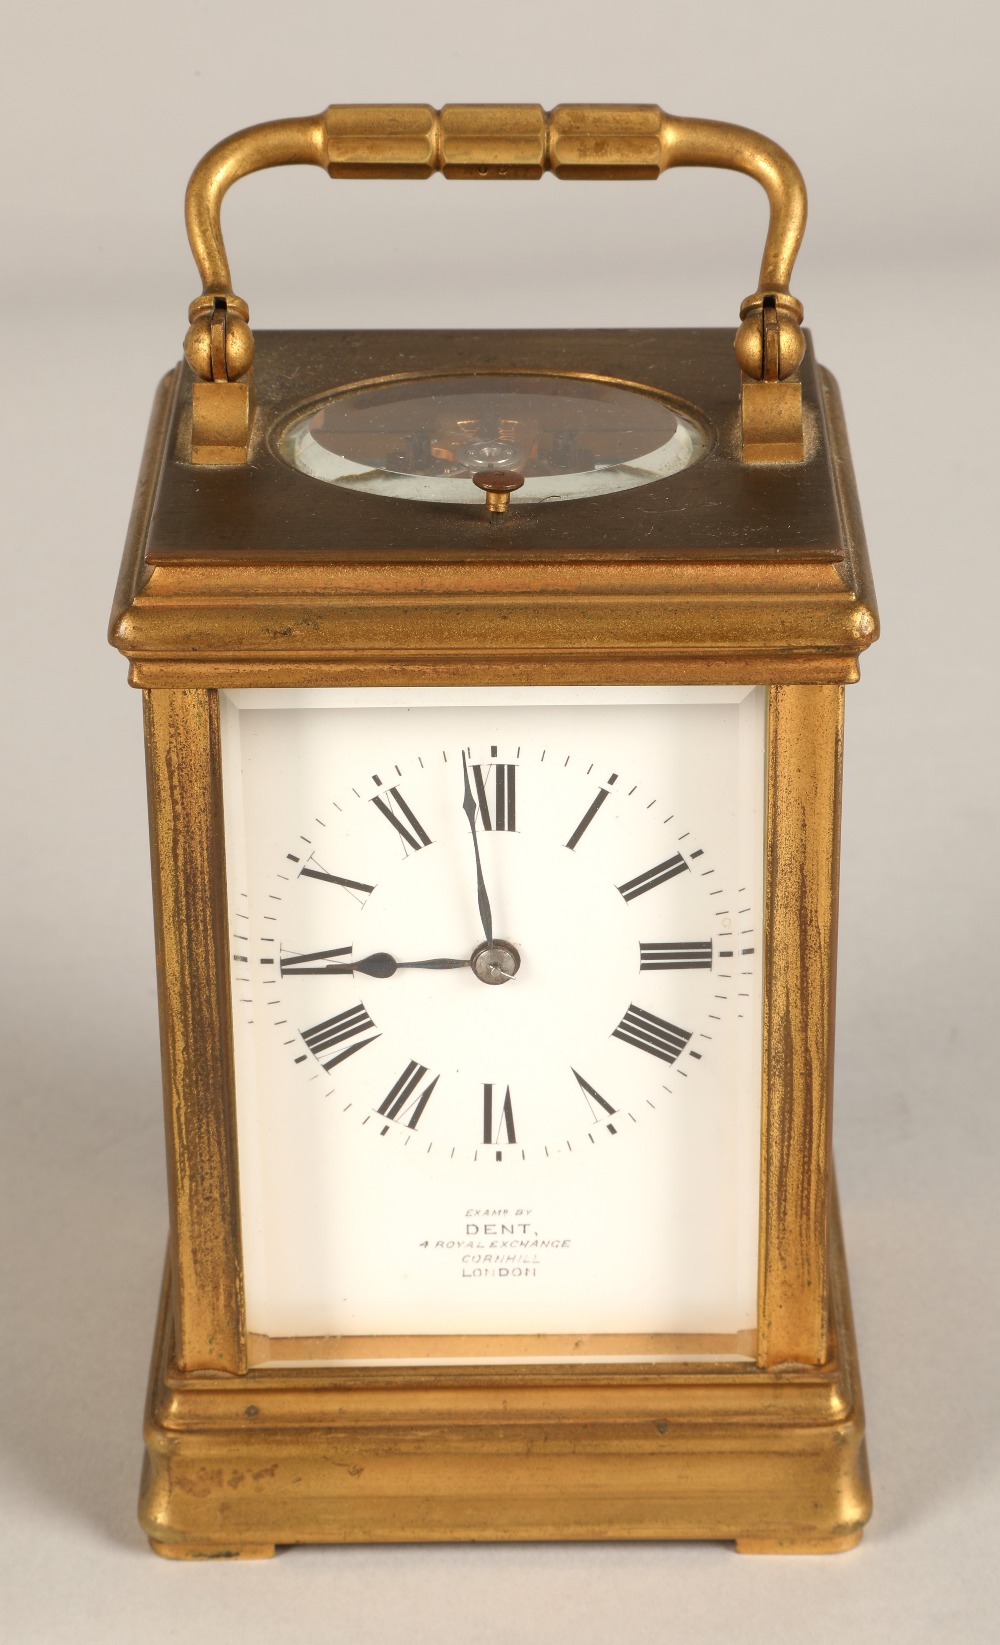 French brass repeating carriage clock, engraved AIGUILLES on the back,  Examp by Dent, 4 Royal - Image 5 of 12